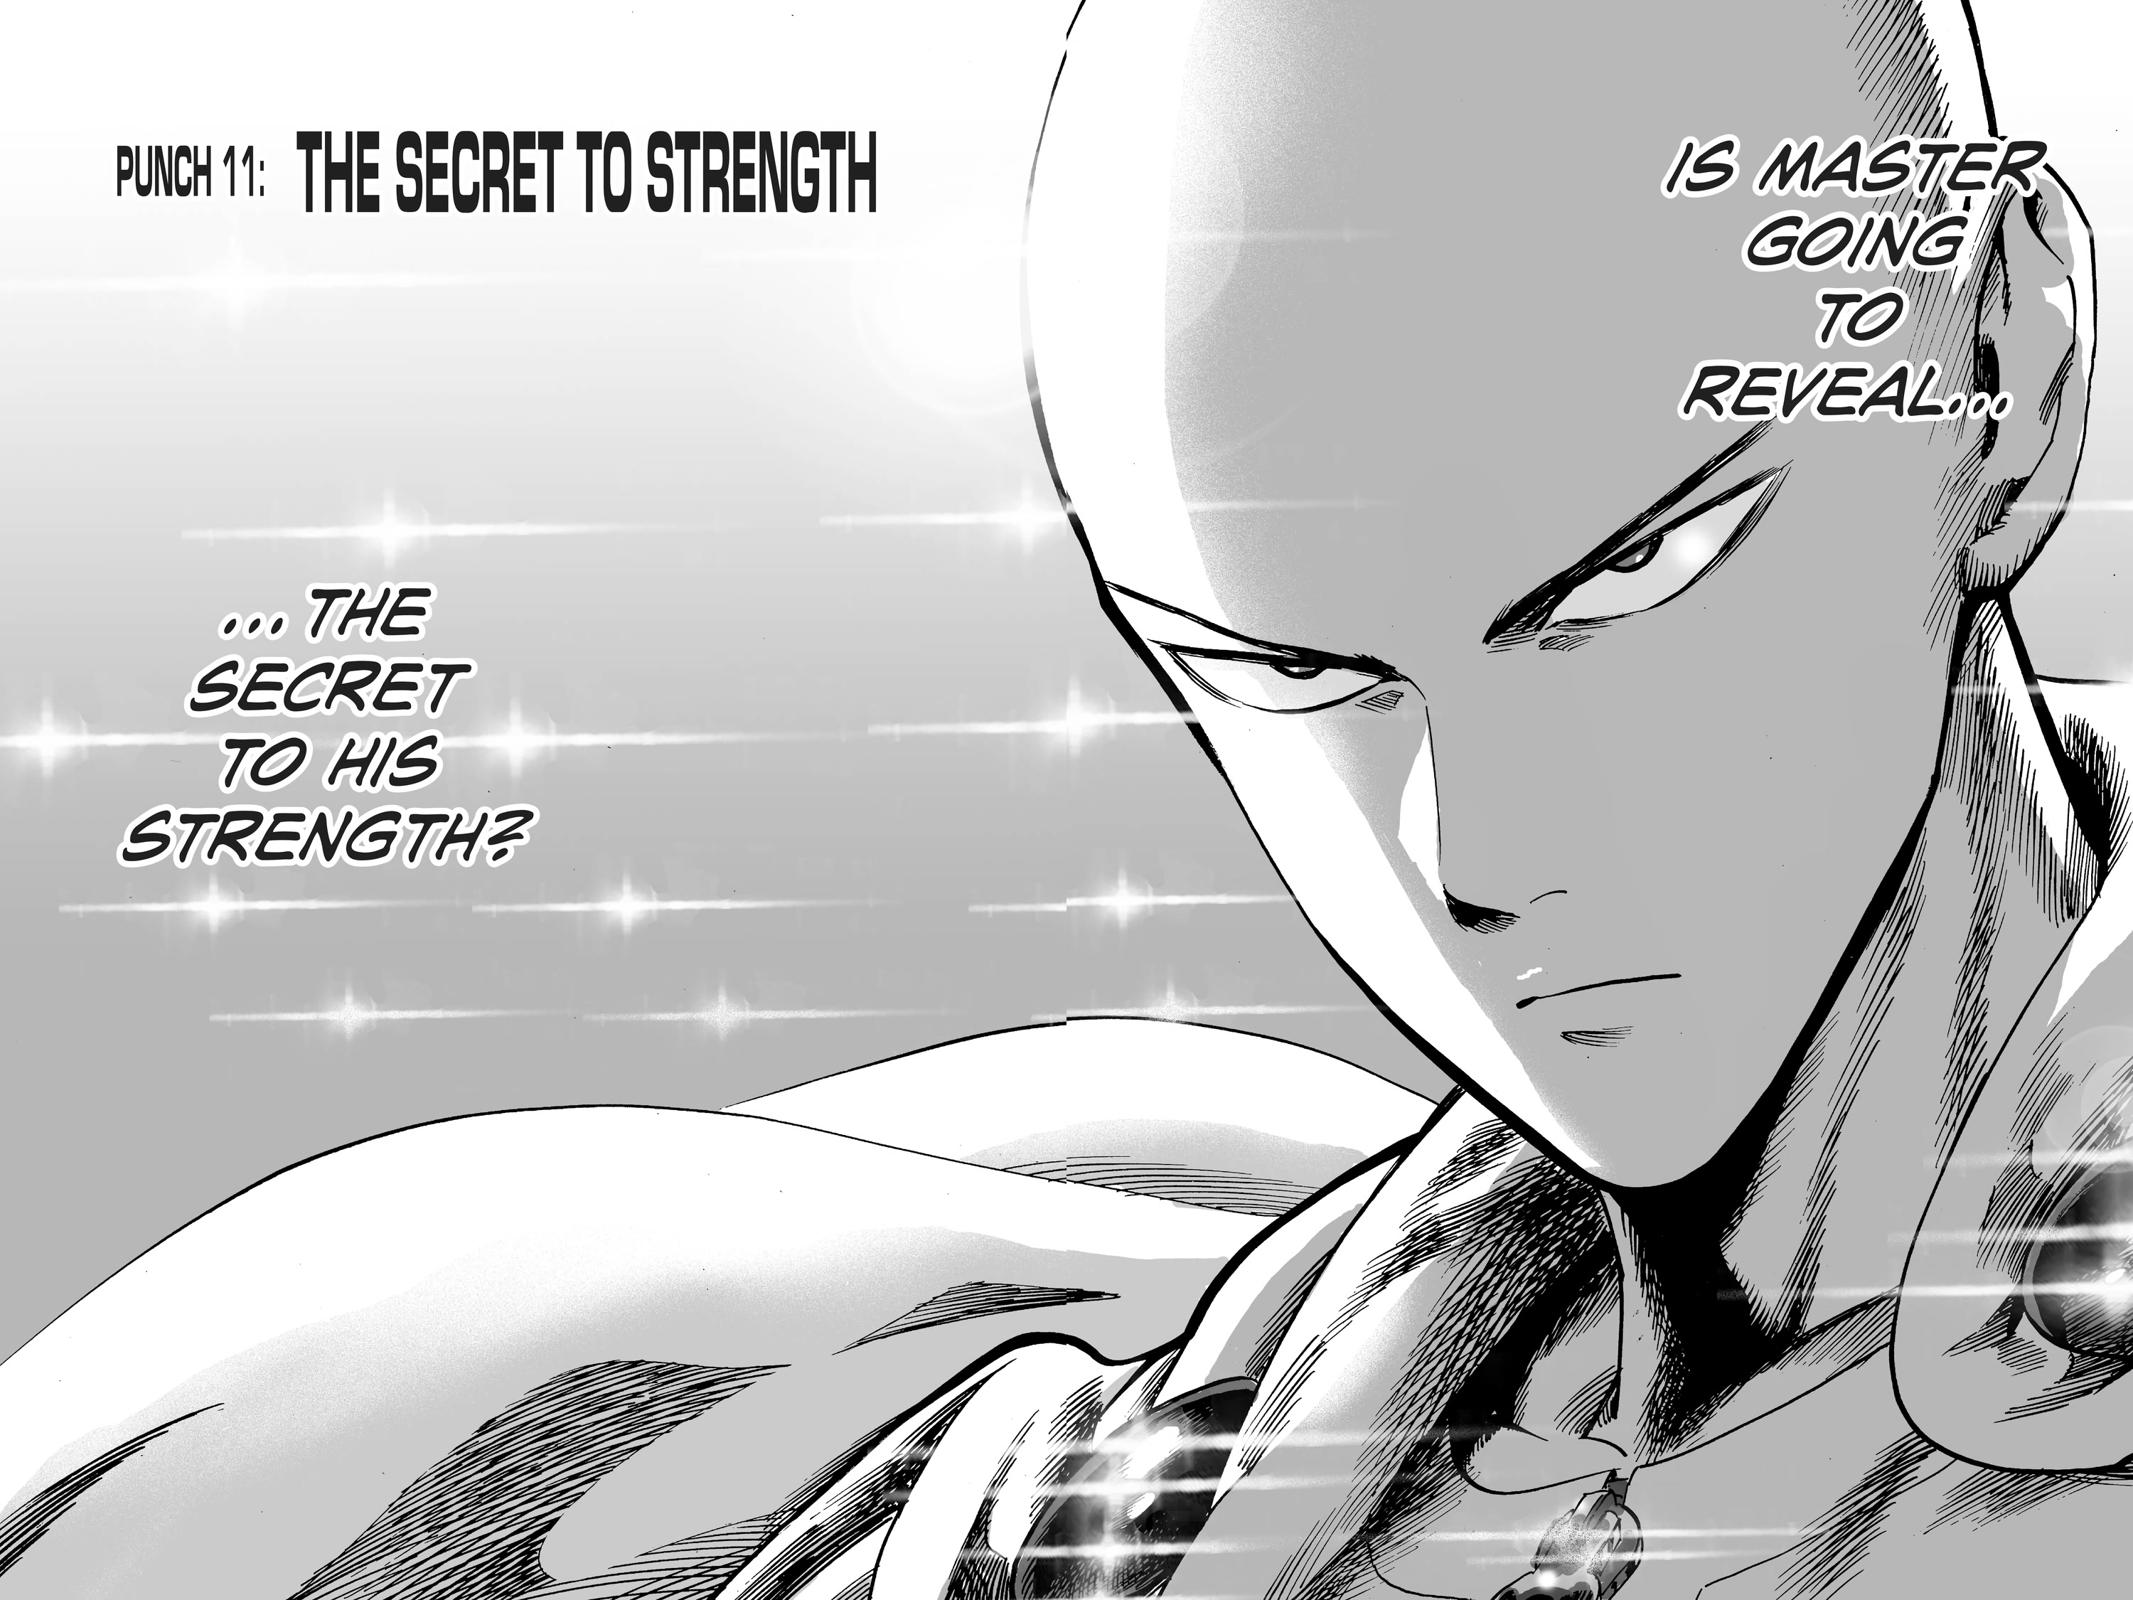 One-Punch Man, Punch 11 image 02